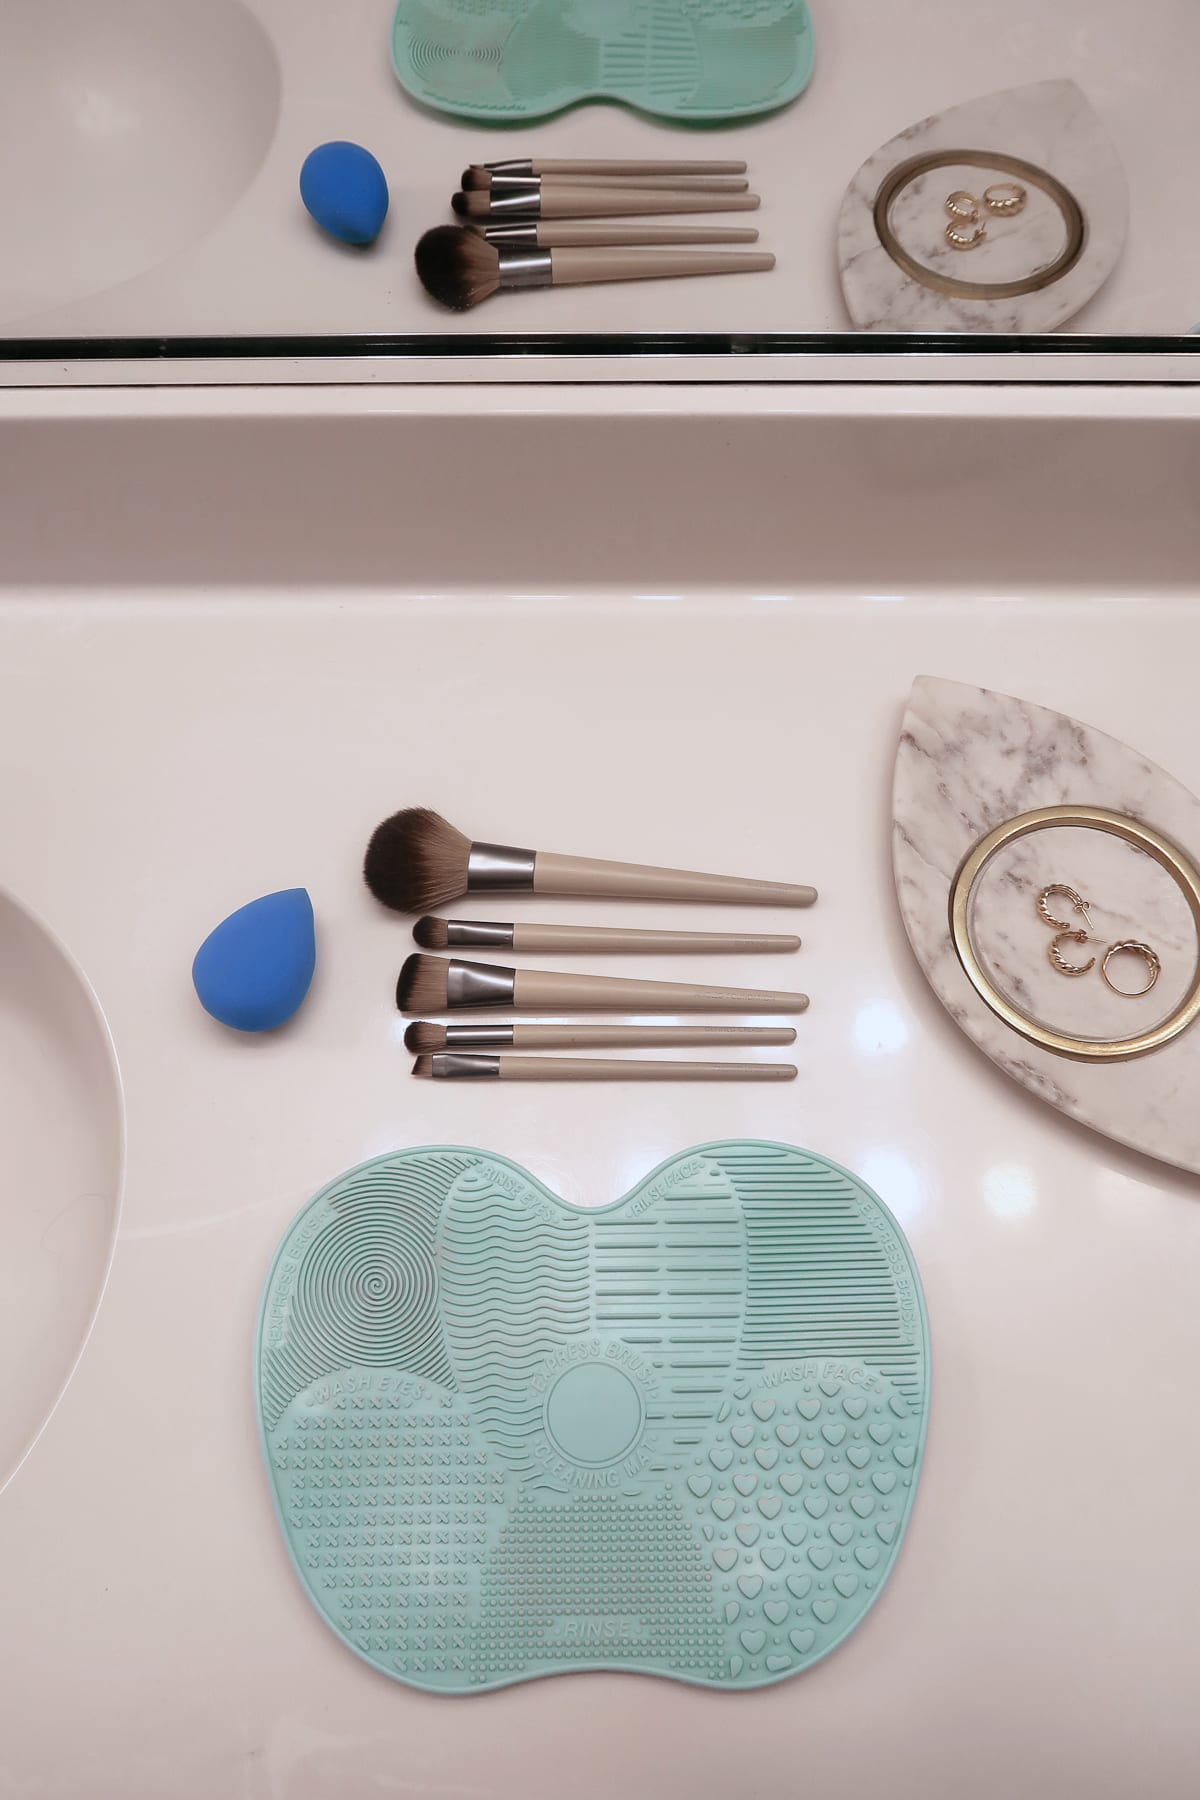 How to clean your makeup brushes with soap